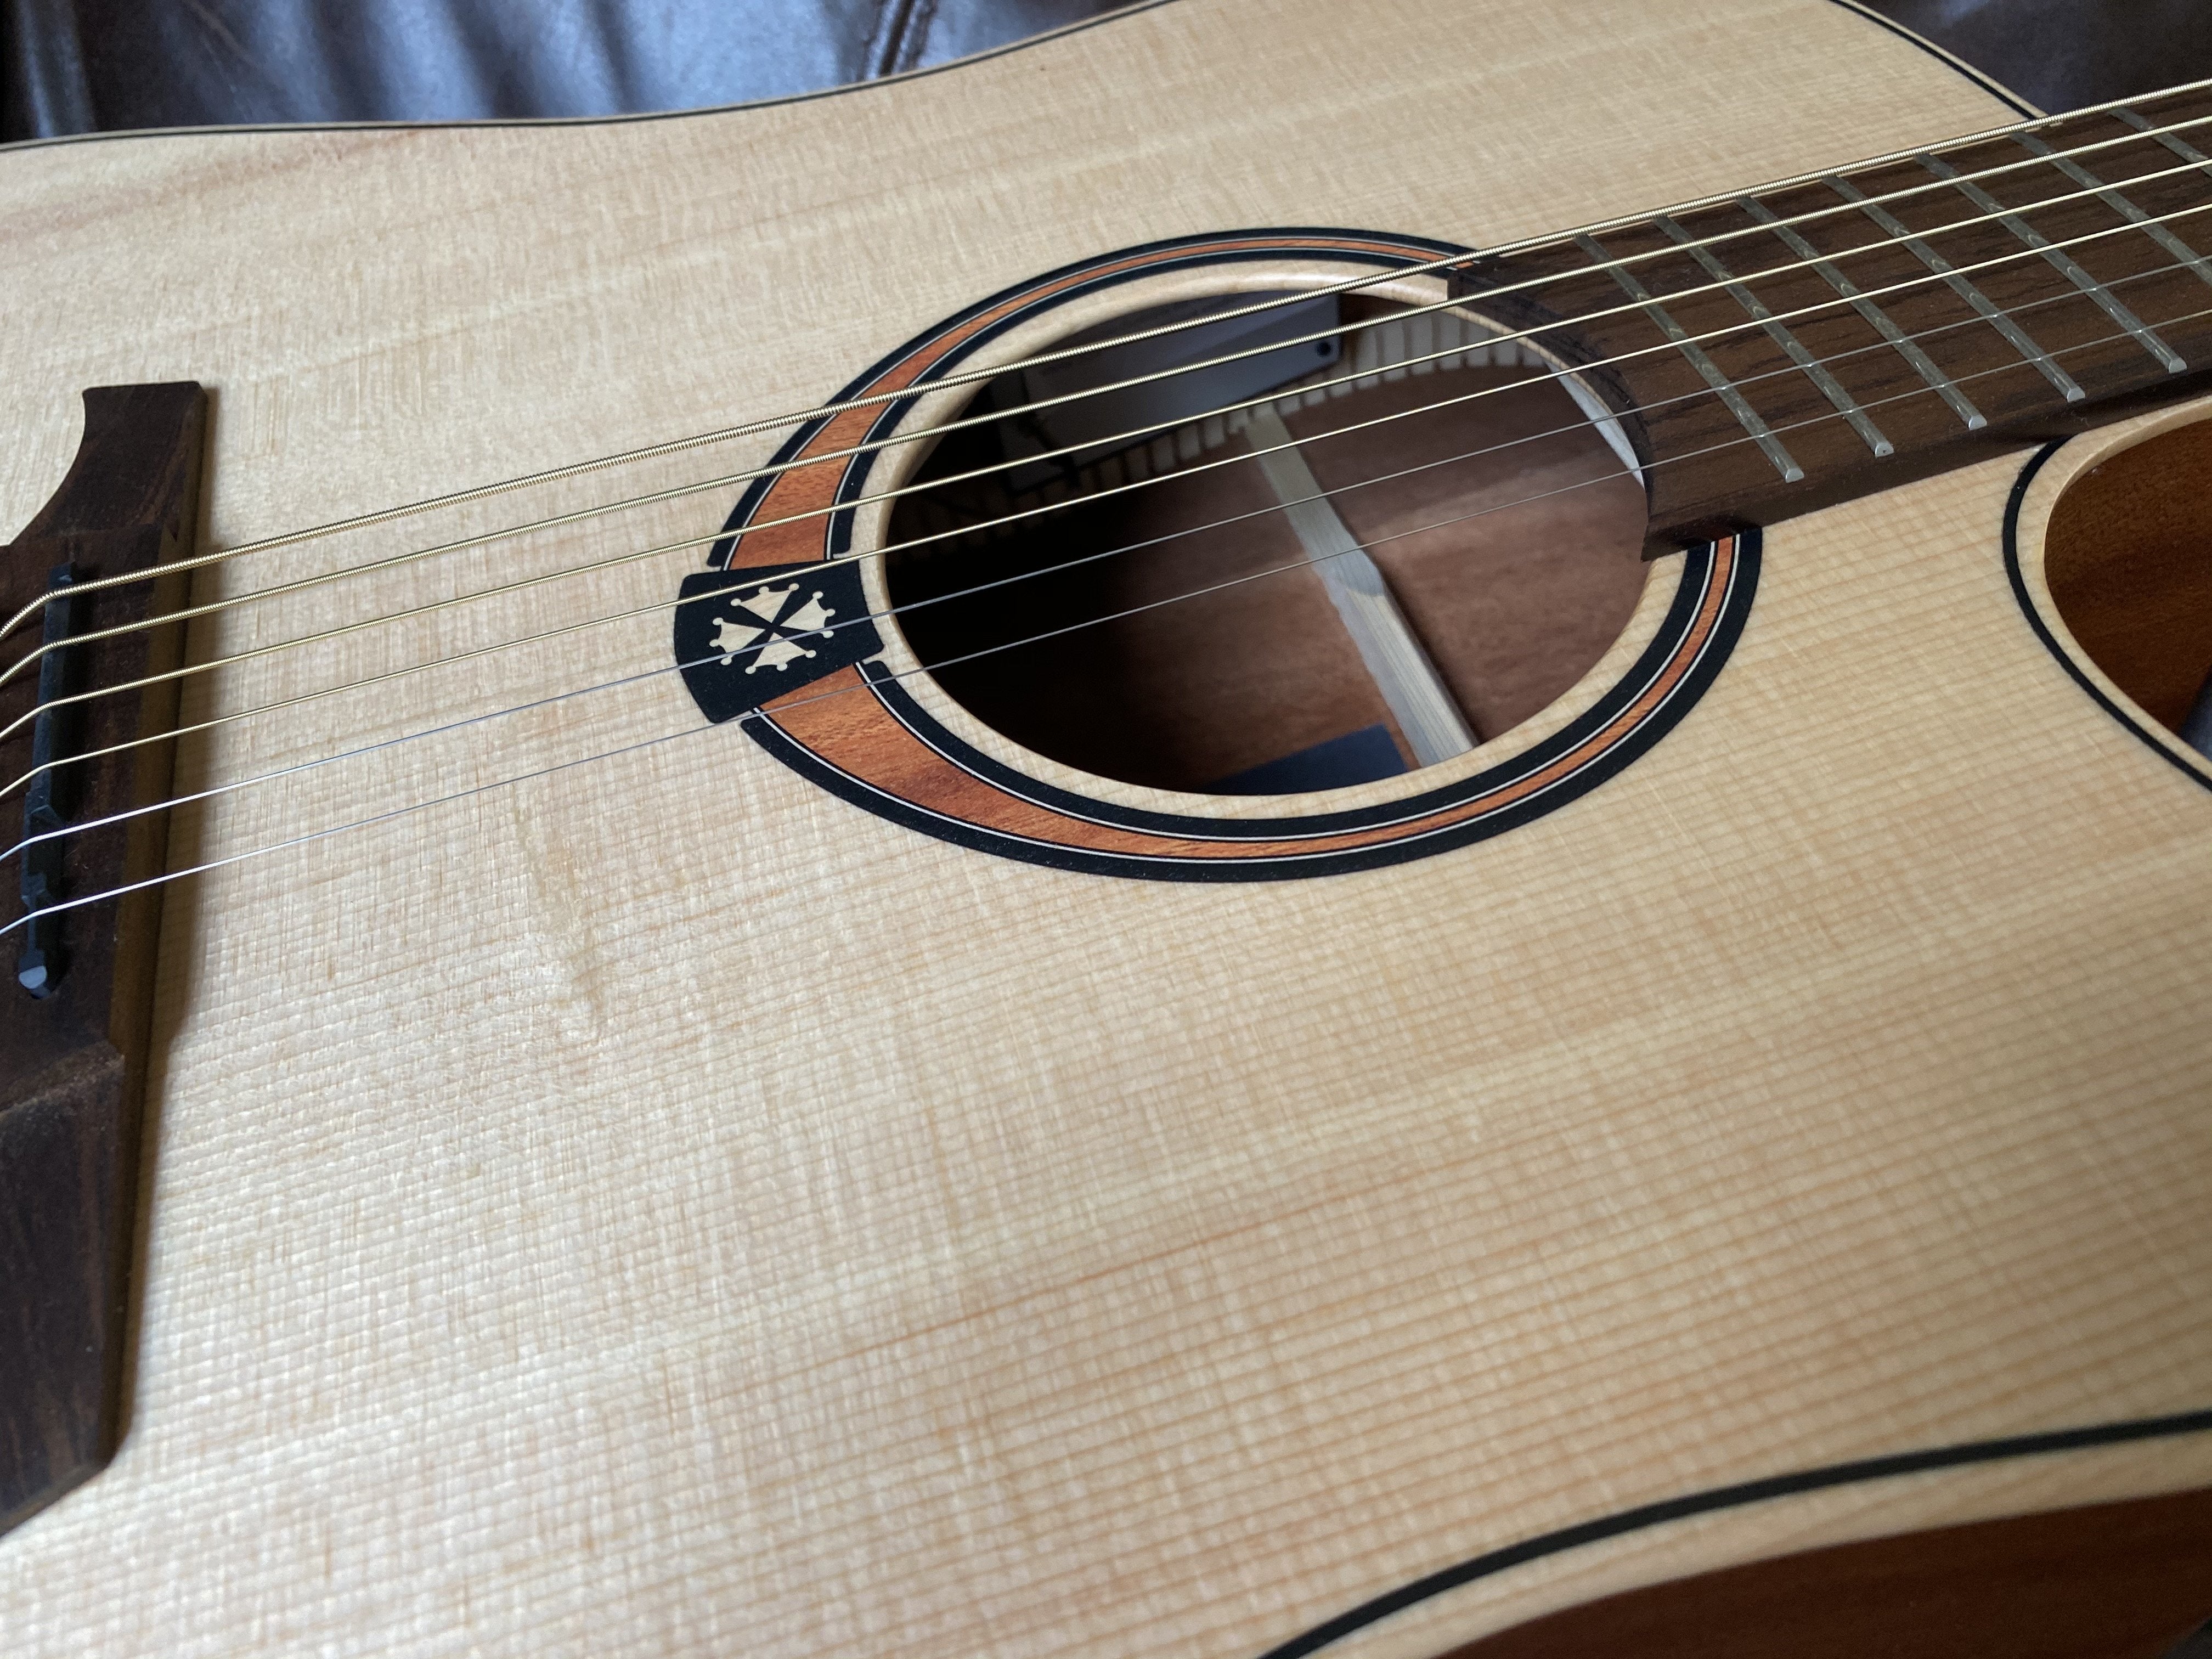 LAG TRAMONTANE 70 T70DCE DREADNOUGHT CUTAWAY ELECTRO, Electro Acoustic Guitar for sale at Richards Guitars.